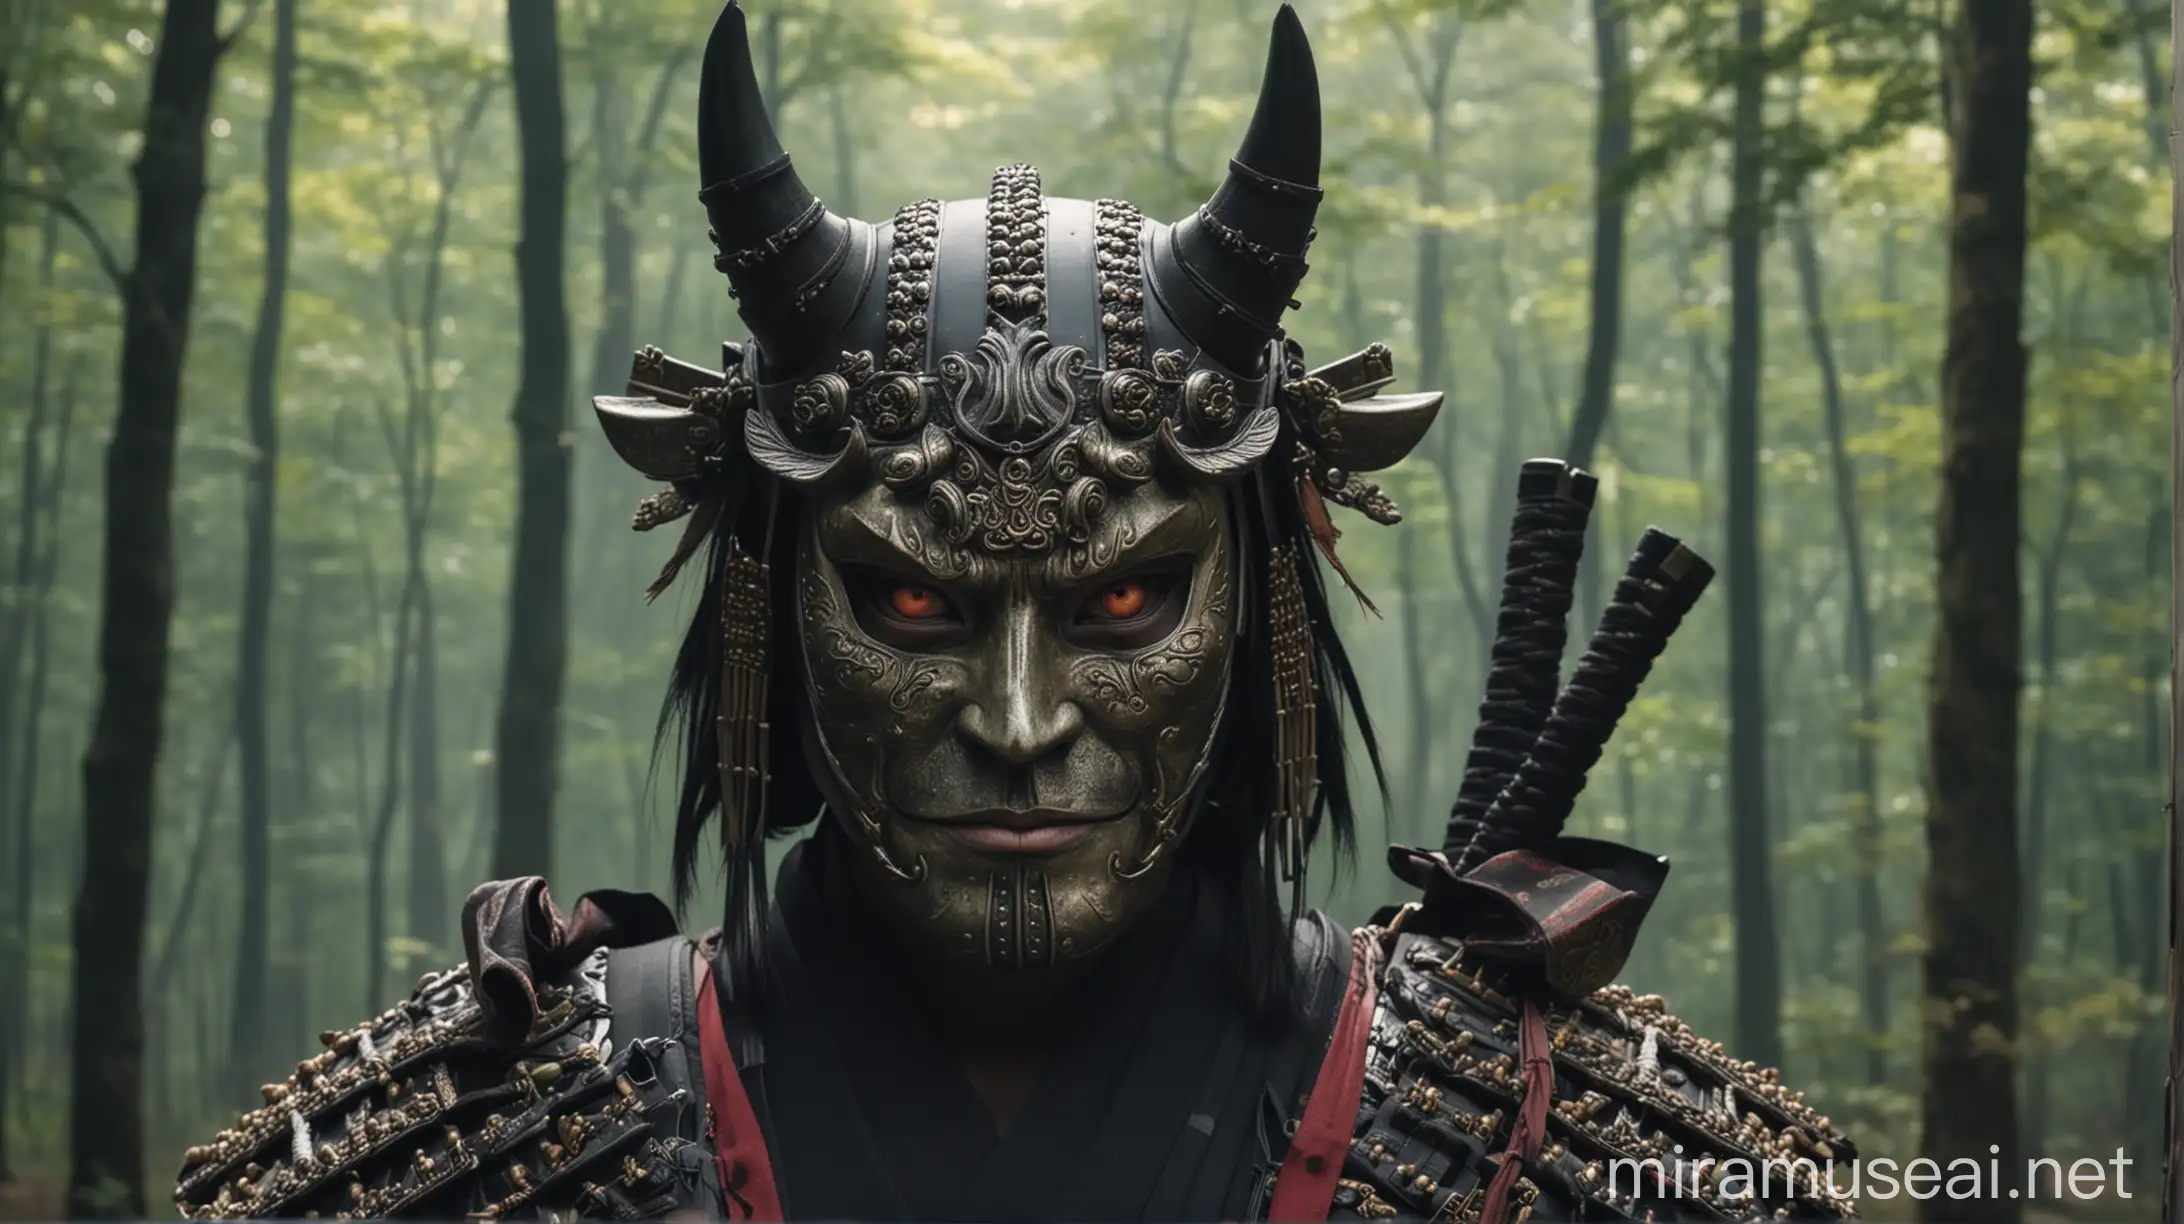 Samurai Warrior with Half Devil Mask in Enchanted Forest